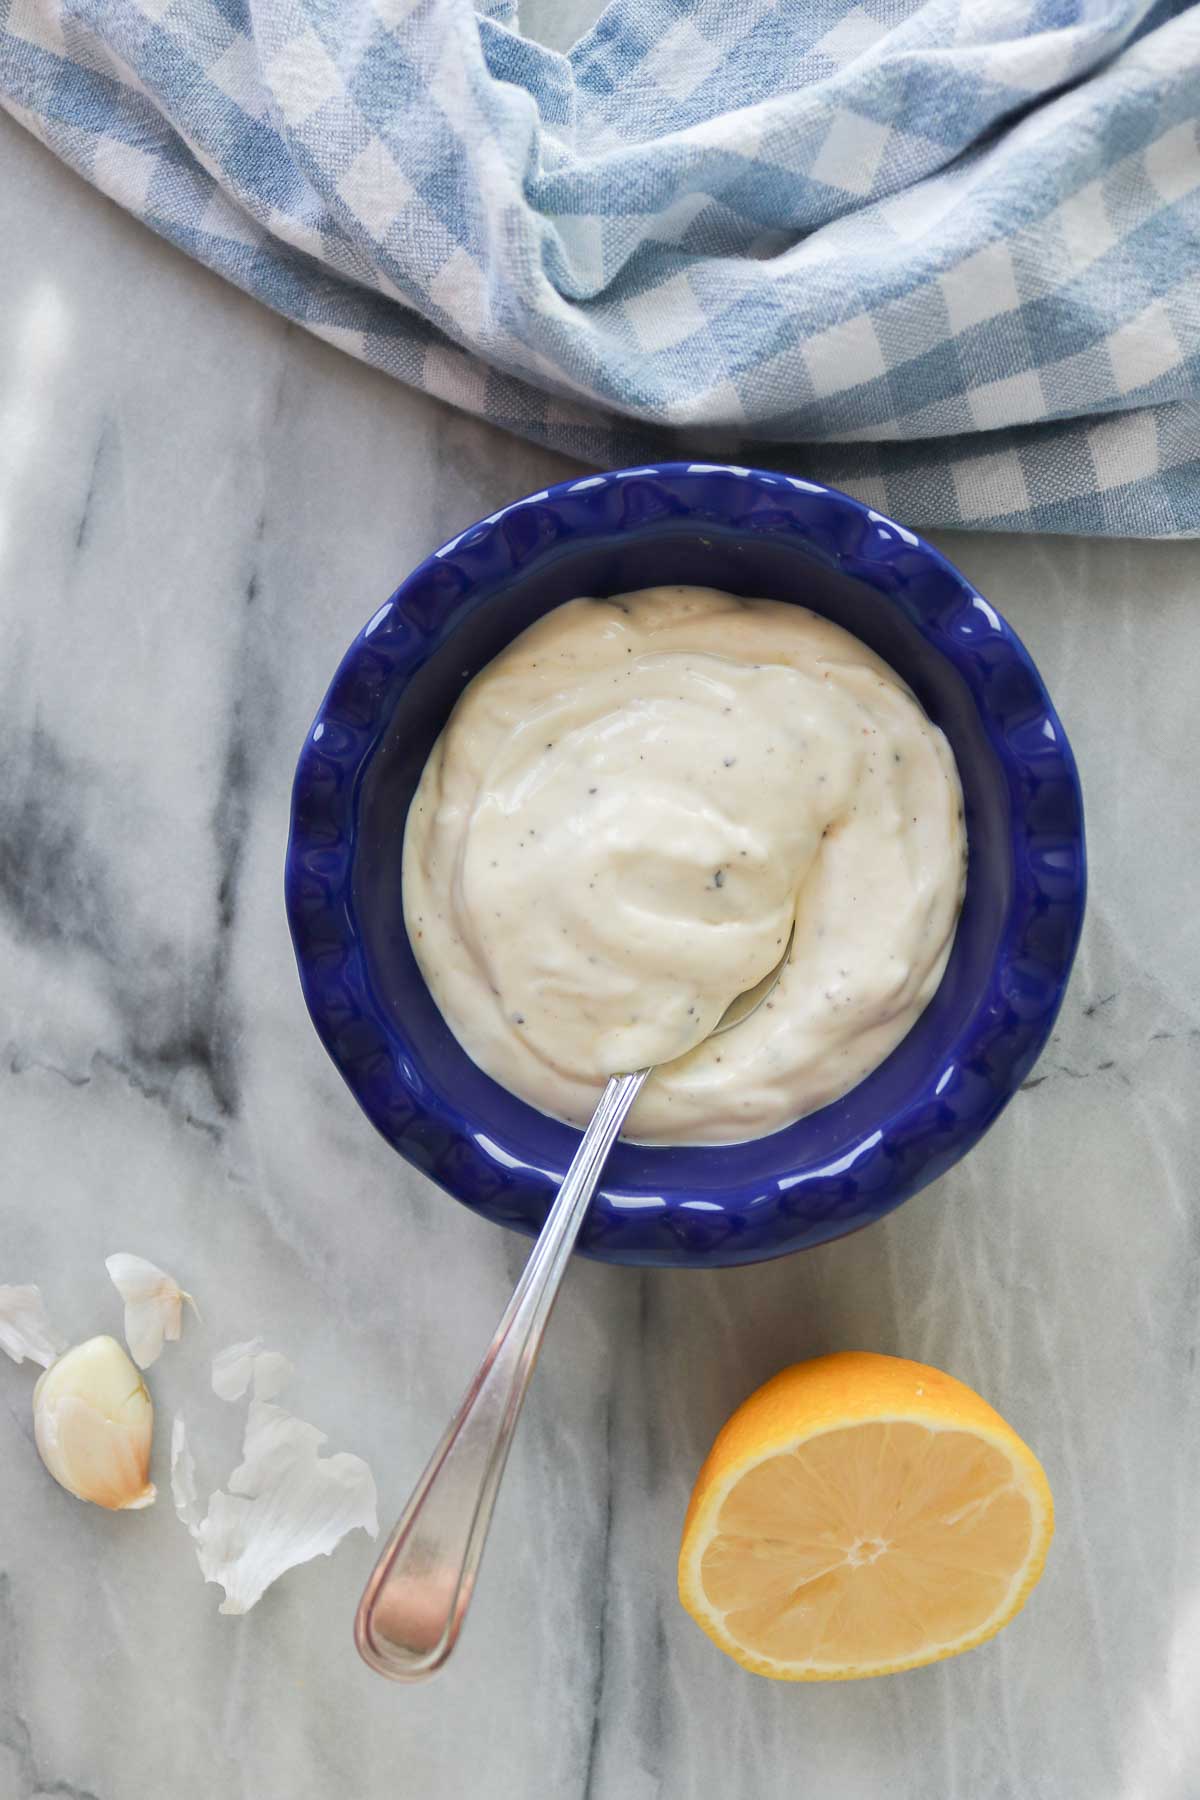 Truffle mayo in a blue serving dish with a spoon.